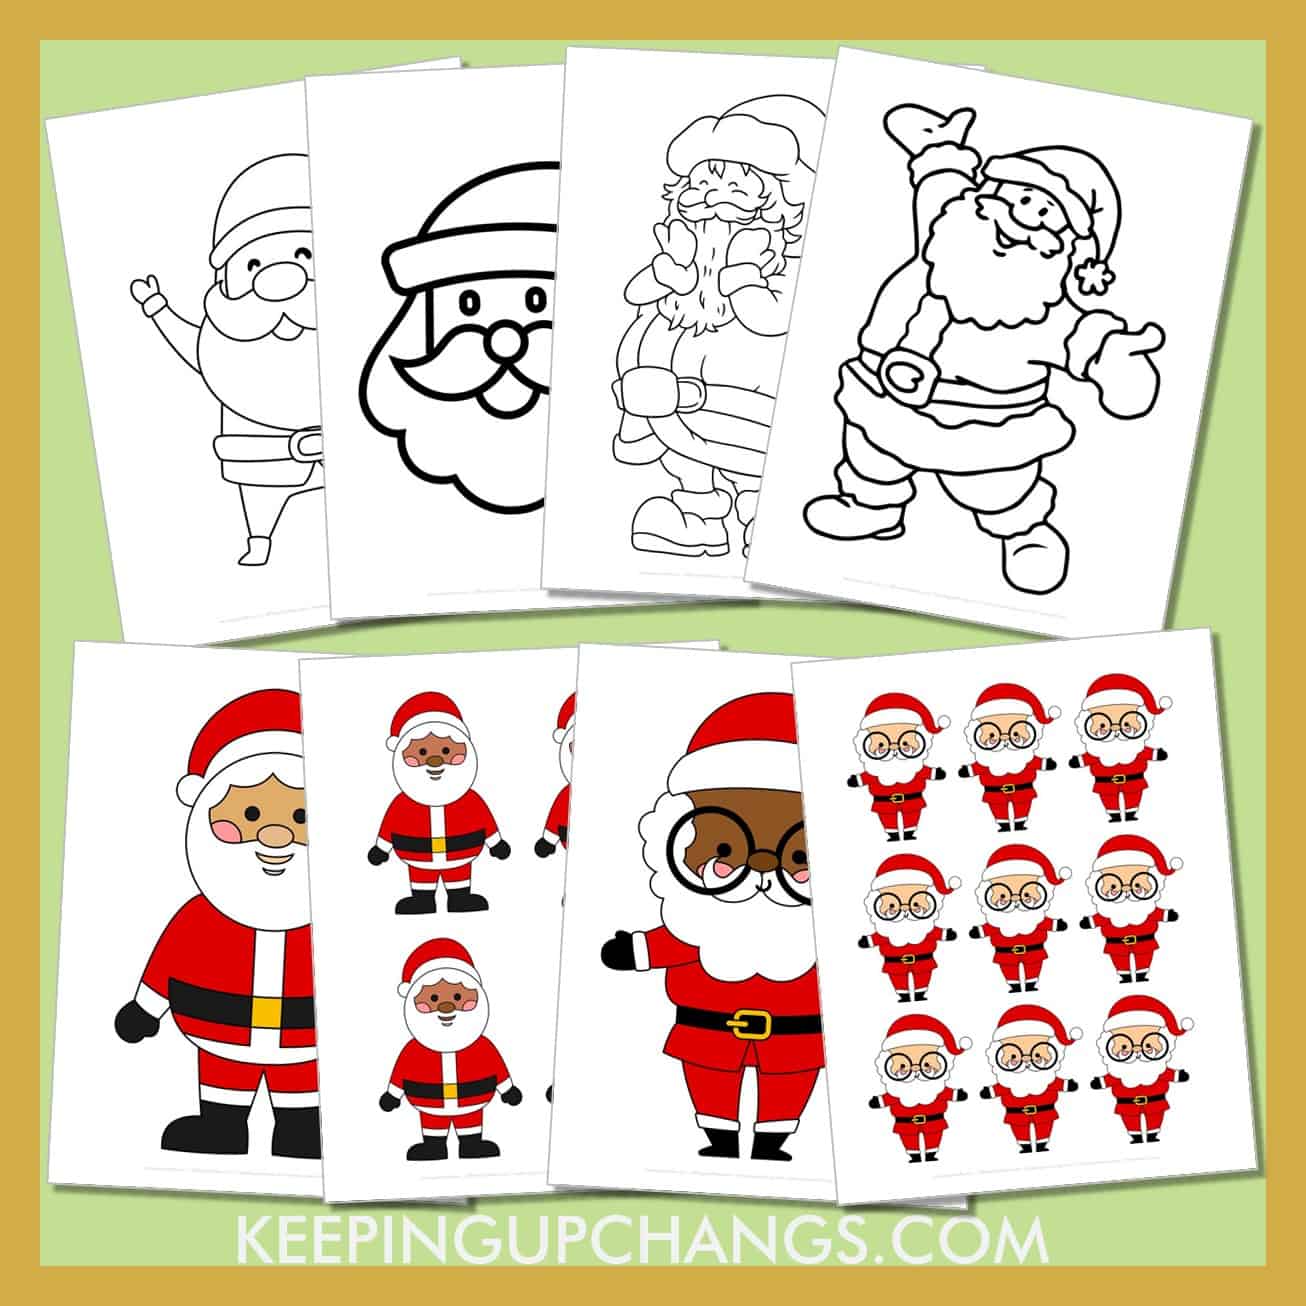 santa outline template stencils for color, black and white cut out in various skin tones.